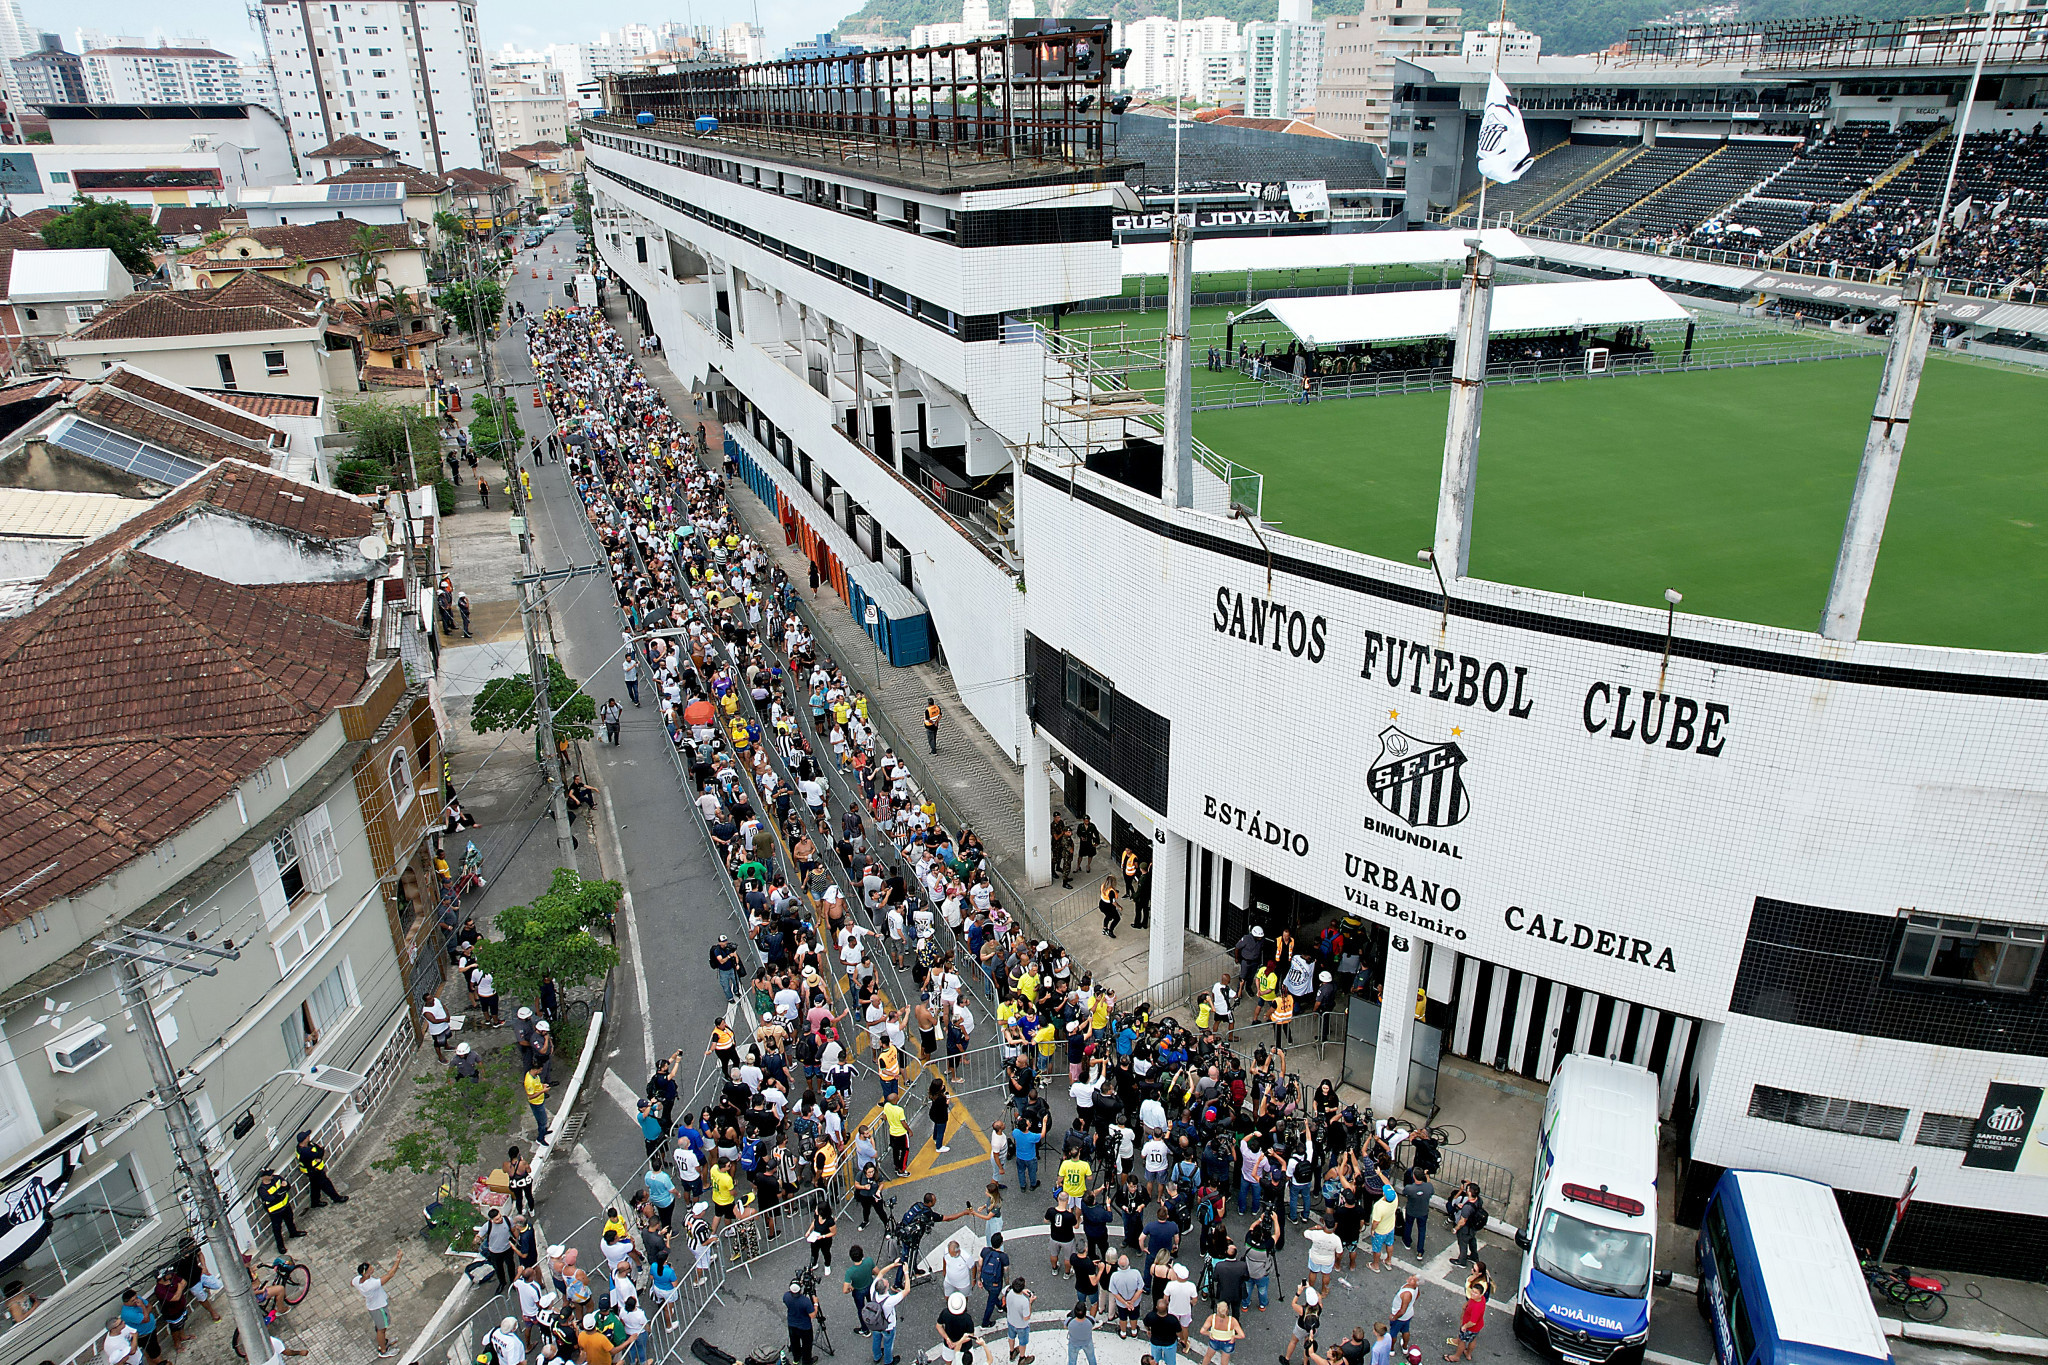 Thousands queued to pay their respects to Pelé at a public wake staged at Santos FC's stadium ©Getty Images